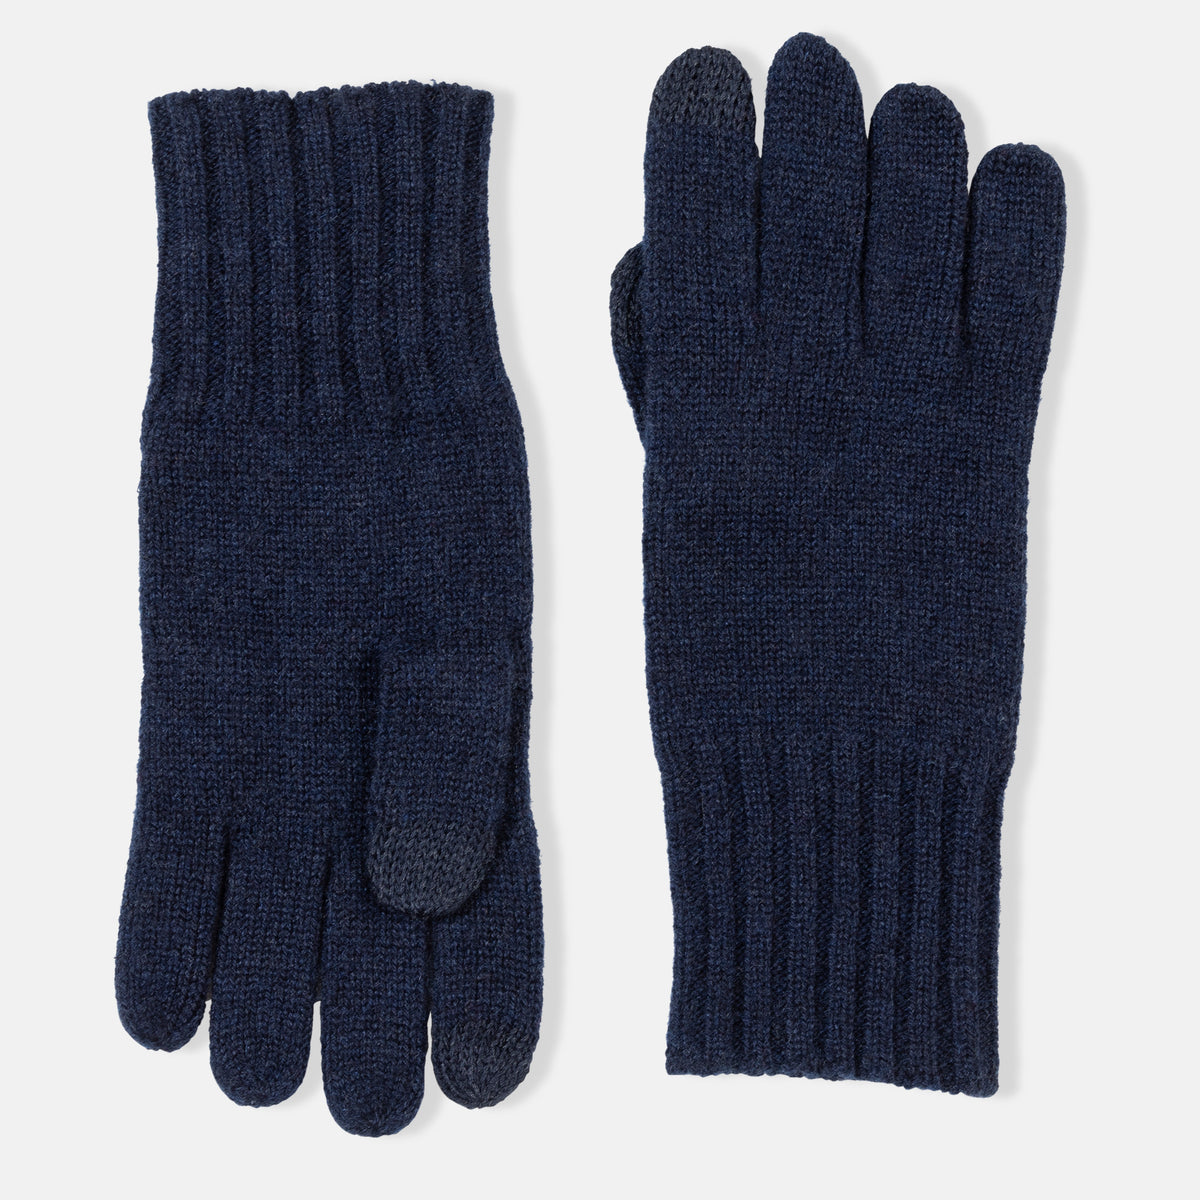 Picture of knit cashmere gloves with touch tech finger tips and rib cuff, navy.